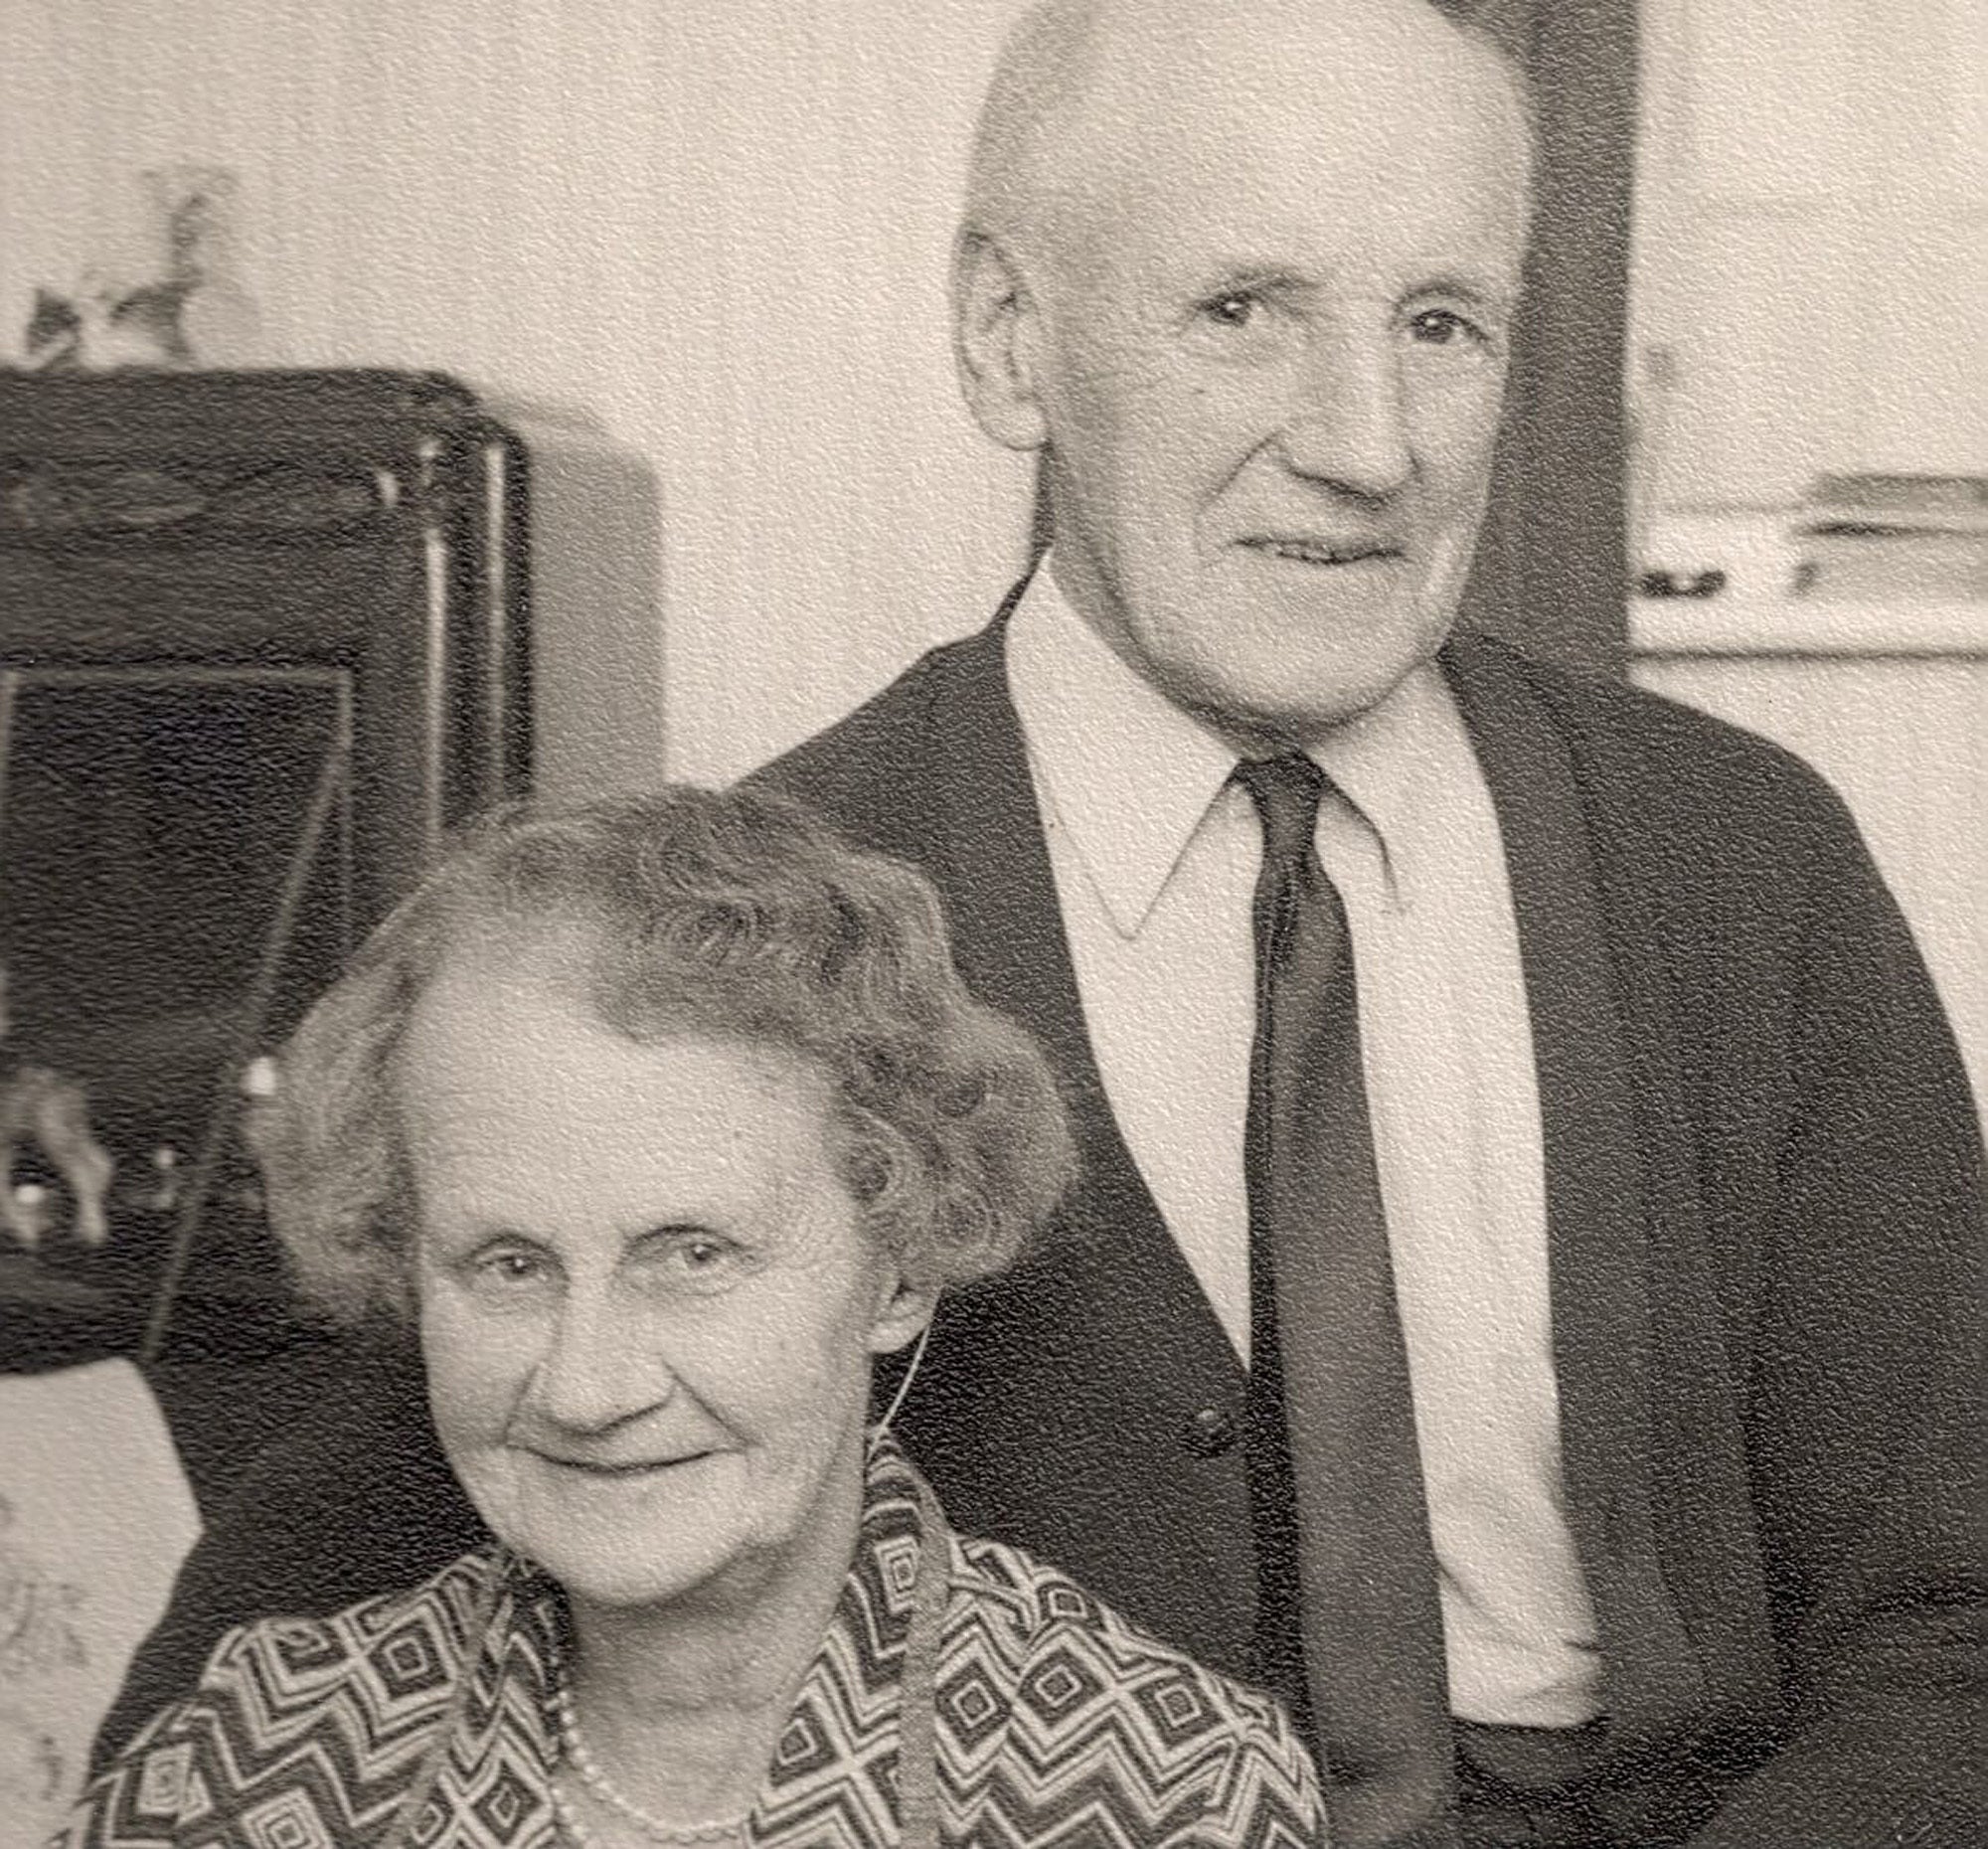 The love story of Vic and Nellie Stead which created Nellie’s tree inspired the public